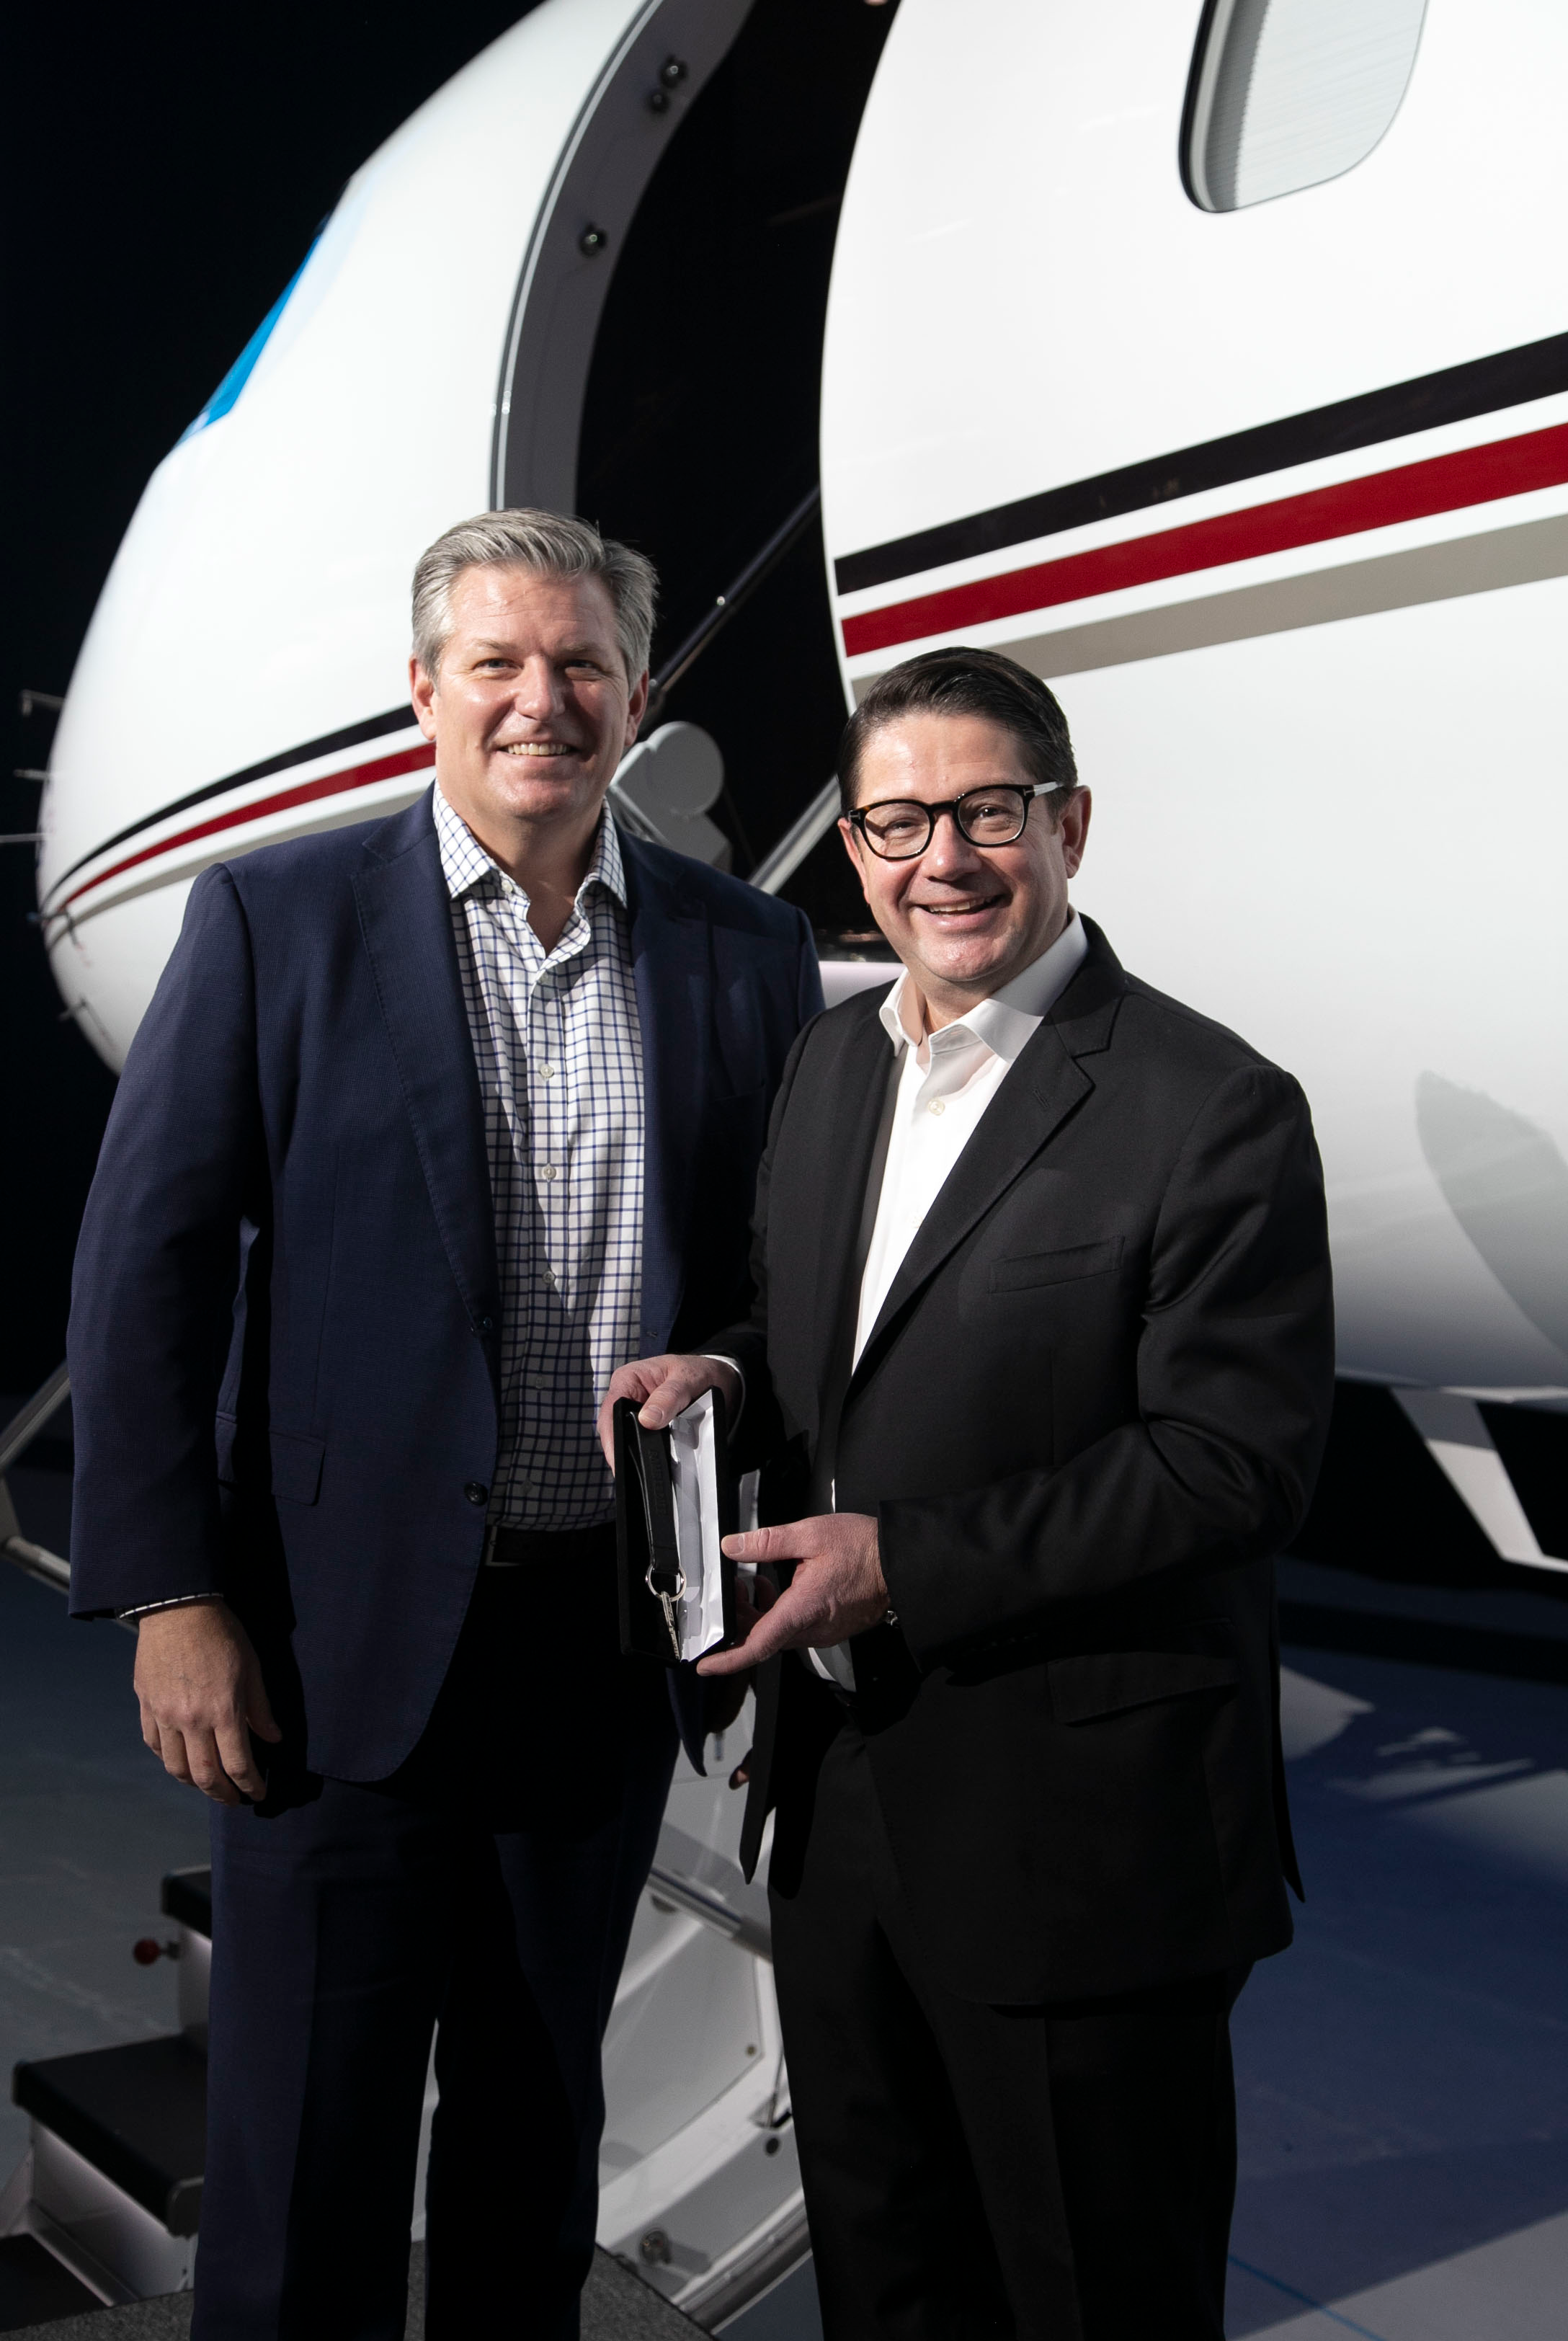 NetJets' leader receives the key to the Global 7500